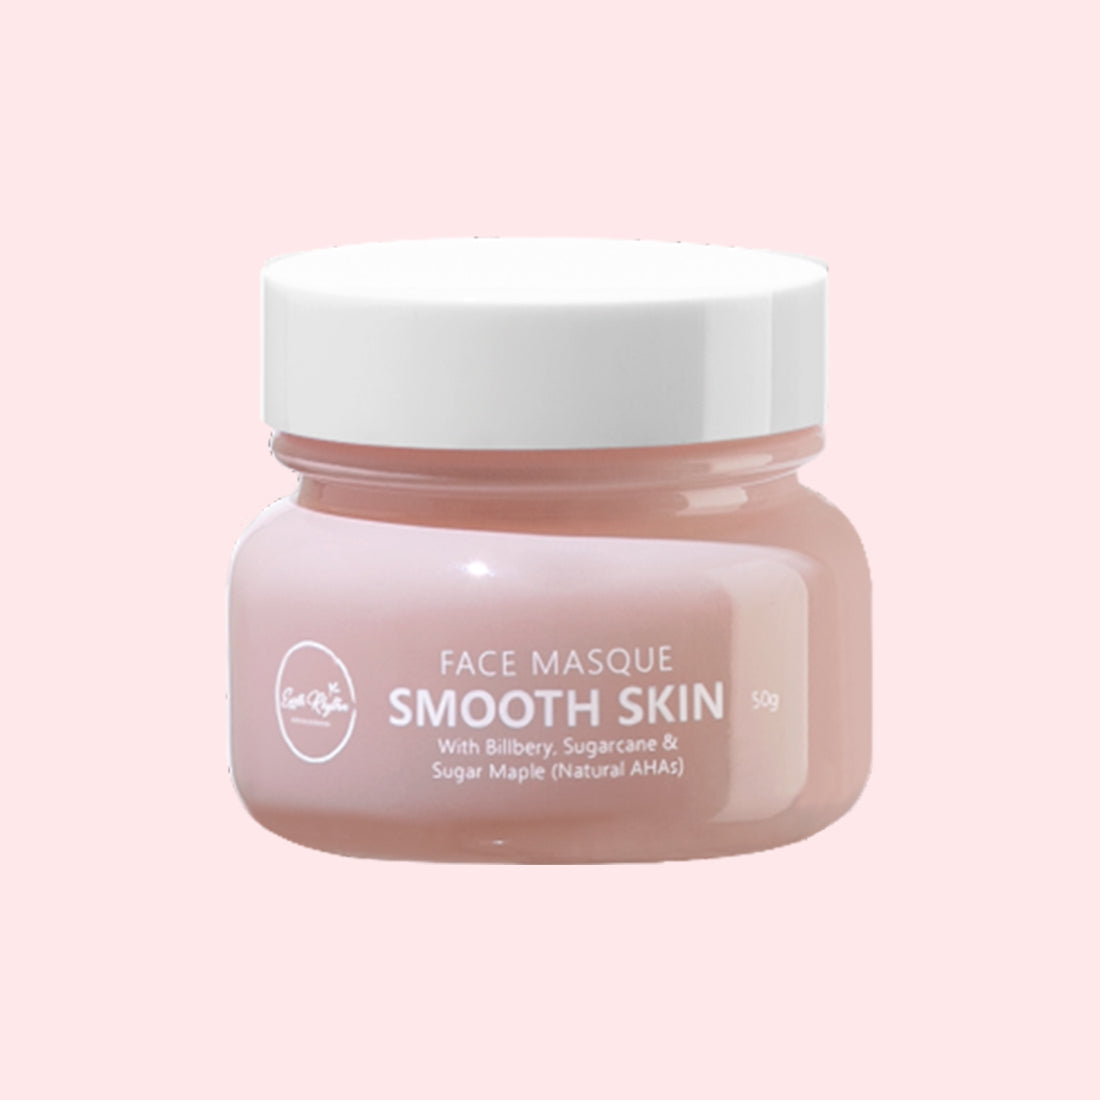 SMOOTH SKIN FACE MASQUE WITH BILBERRY, SUGARCANE